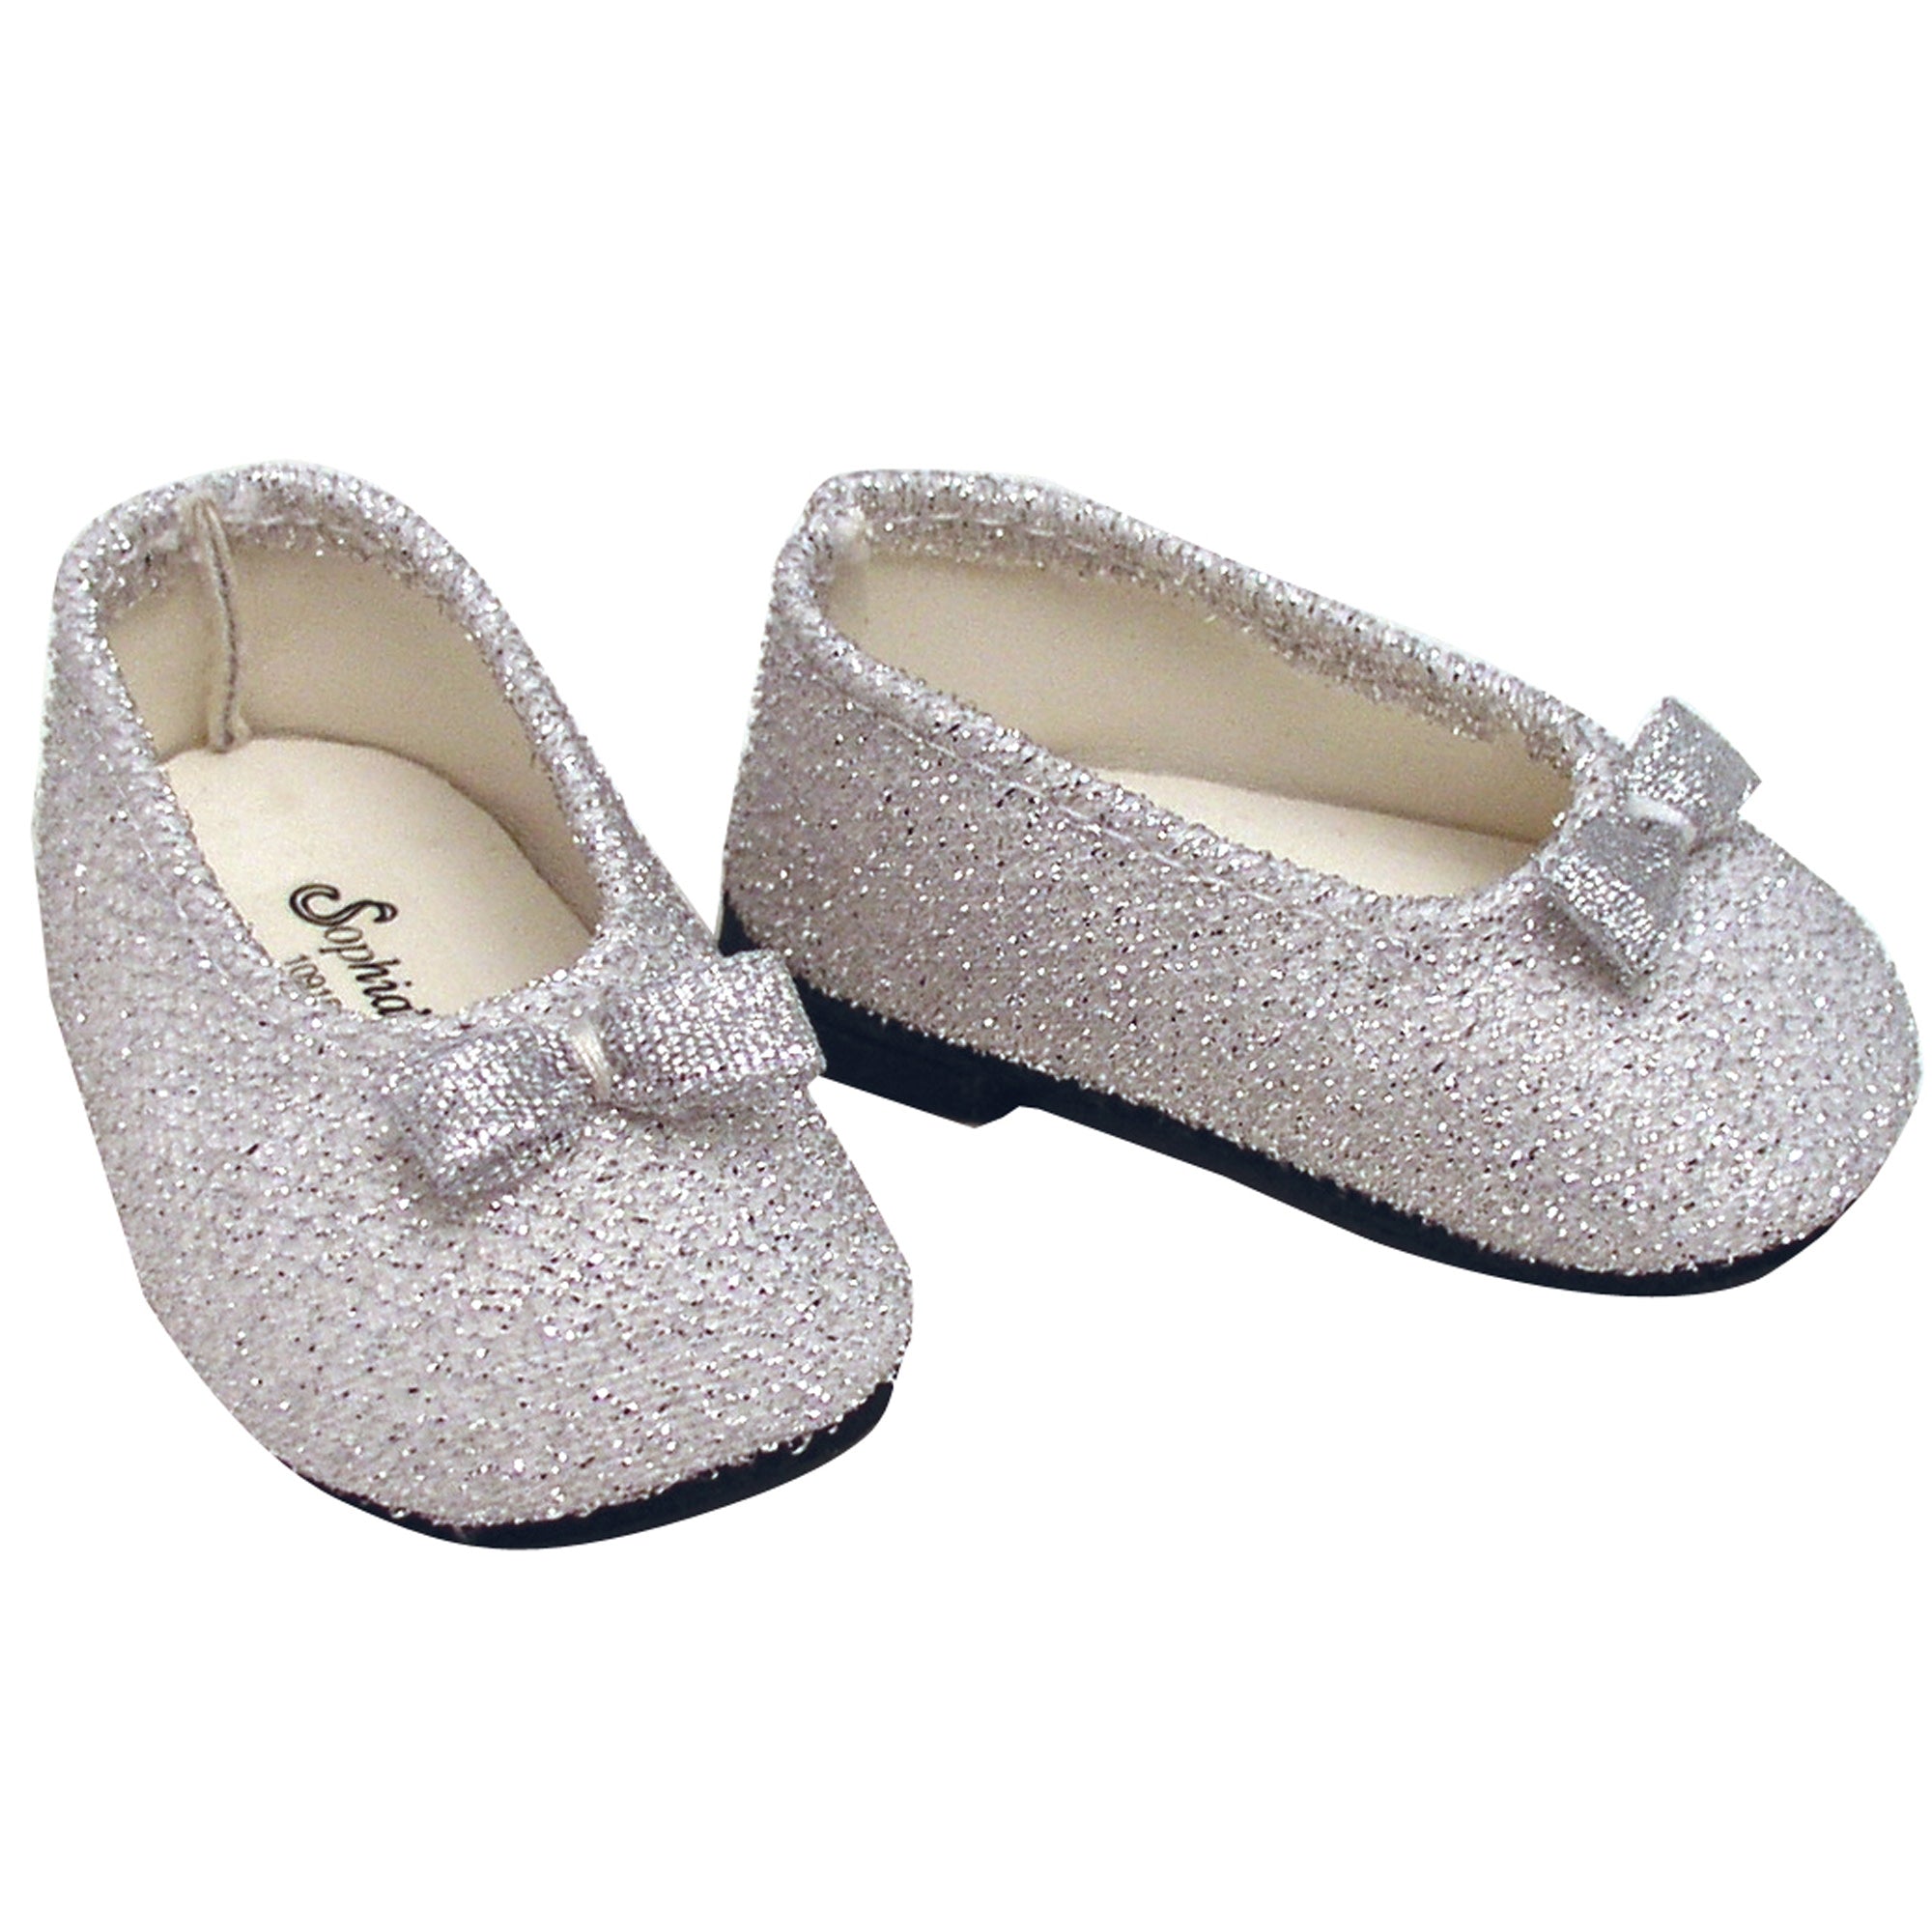 Sophia's Flat Glitter Shoes with Bow for 18" Dolls, Silver